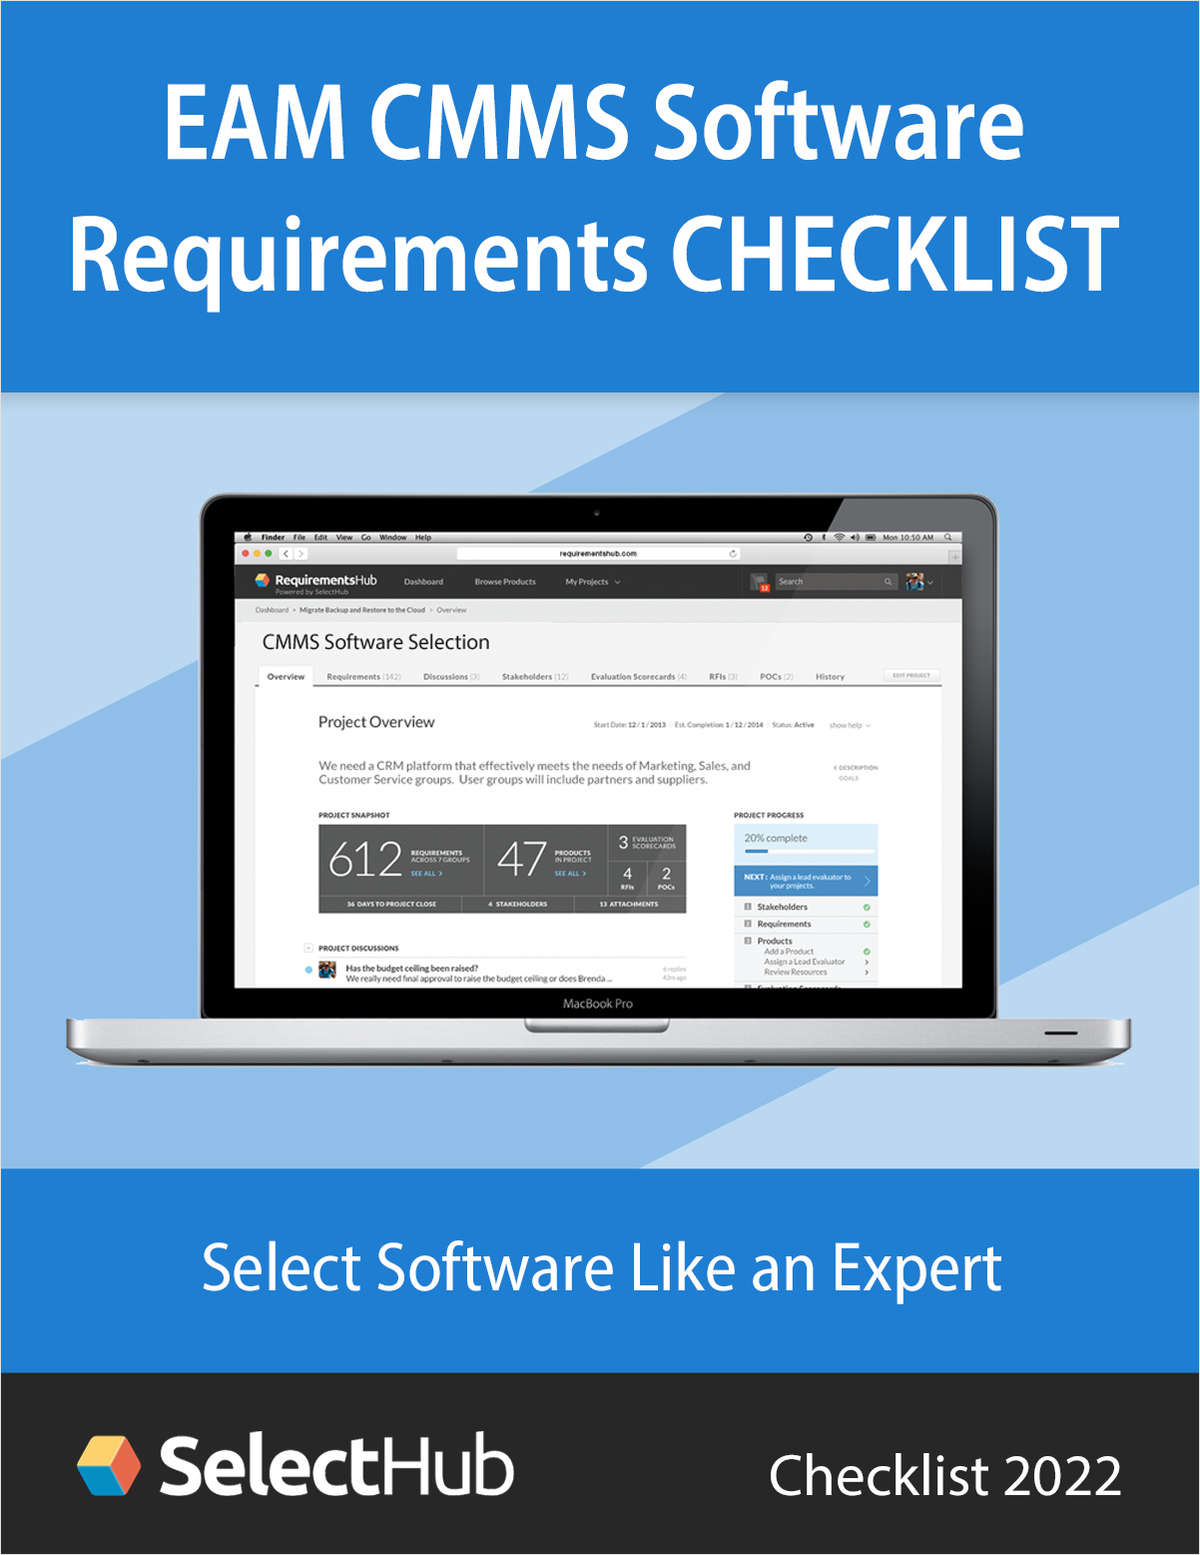 EAM/CMMS Software Requirements Checklist for 2022